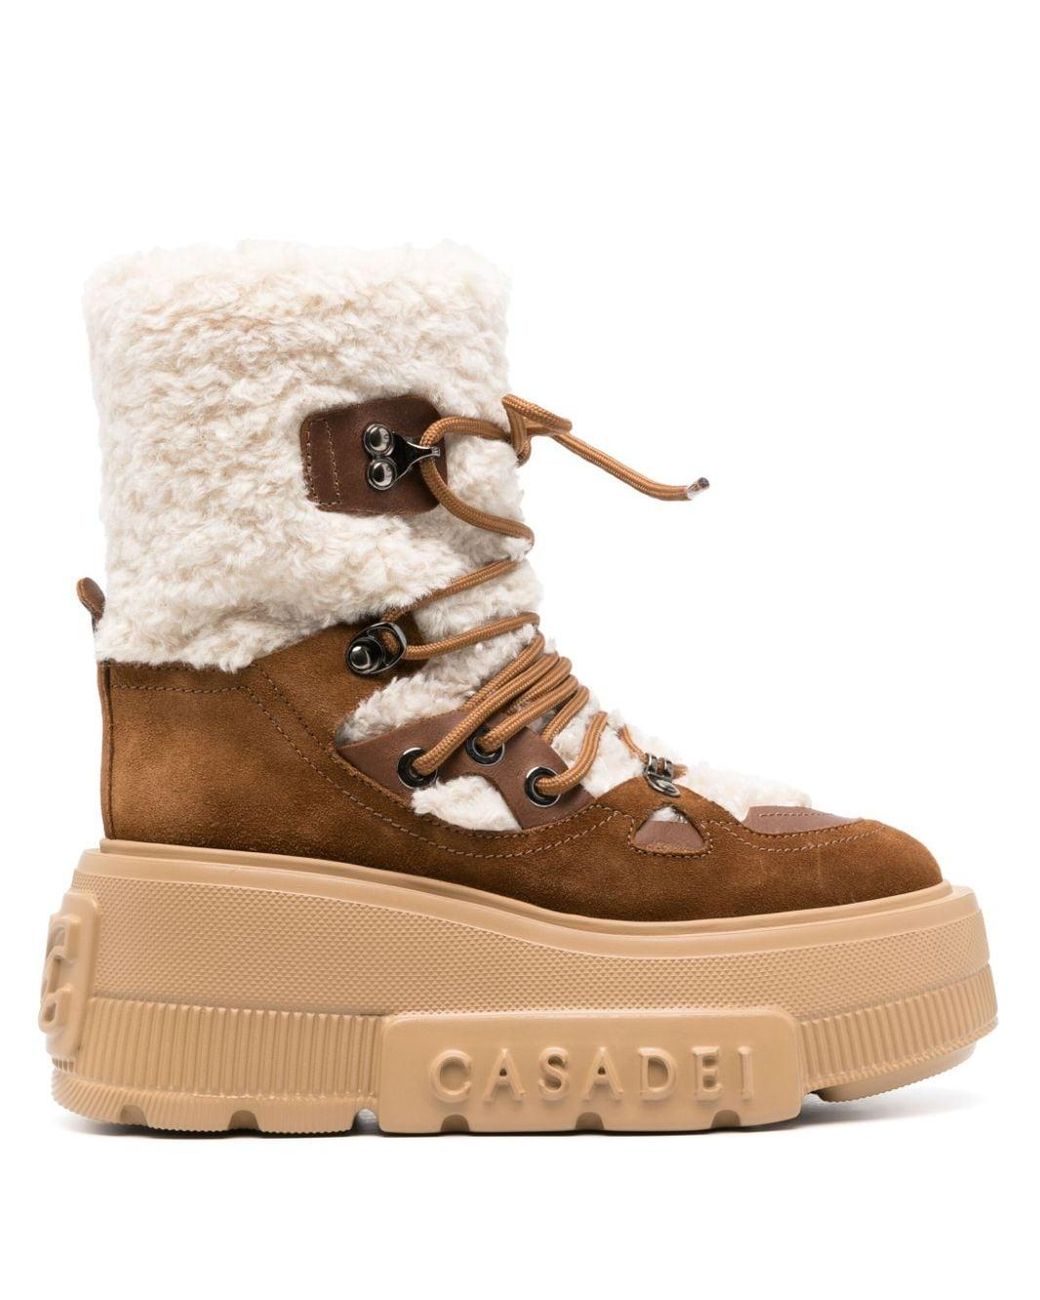 Casadei Stivali Polacco Shearling-lining Boots in Natural | Lyst